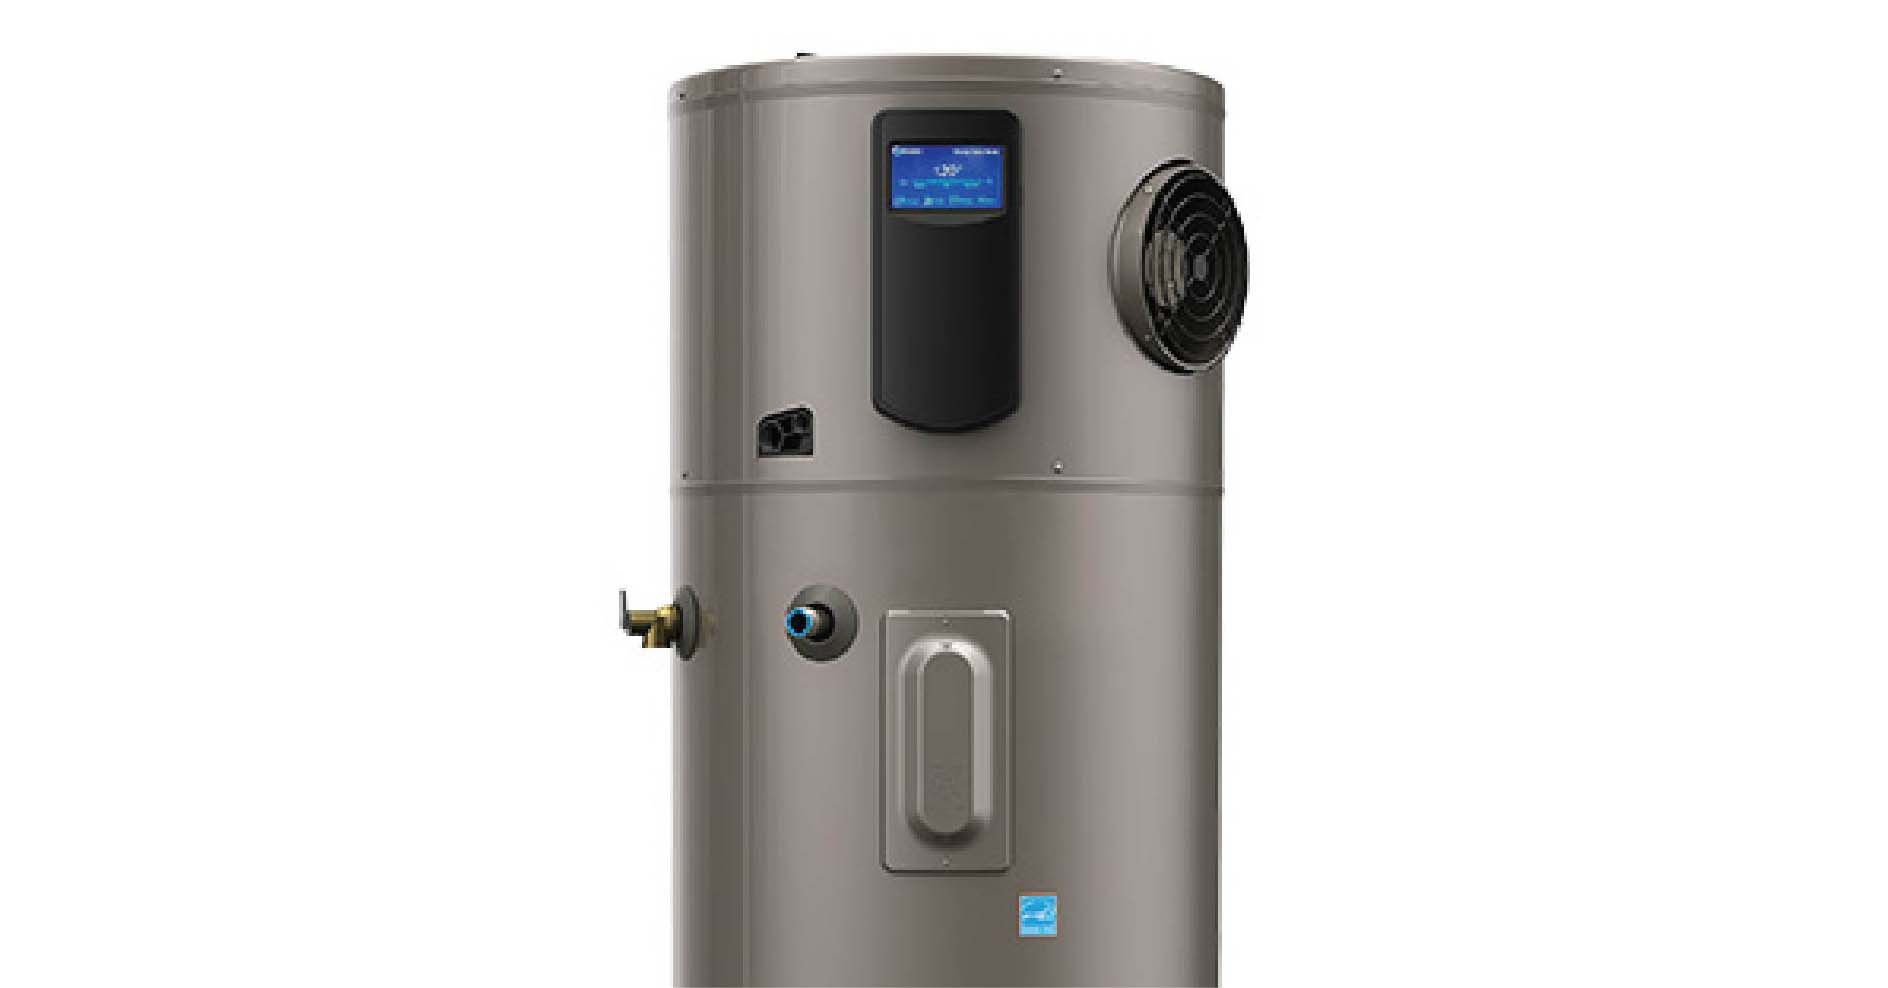 Why Should I Upgrade to a Heat Pump Water Heater?